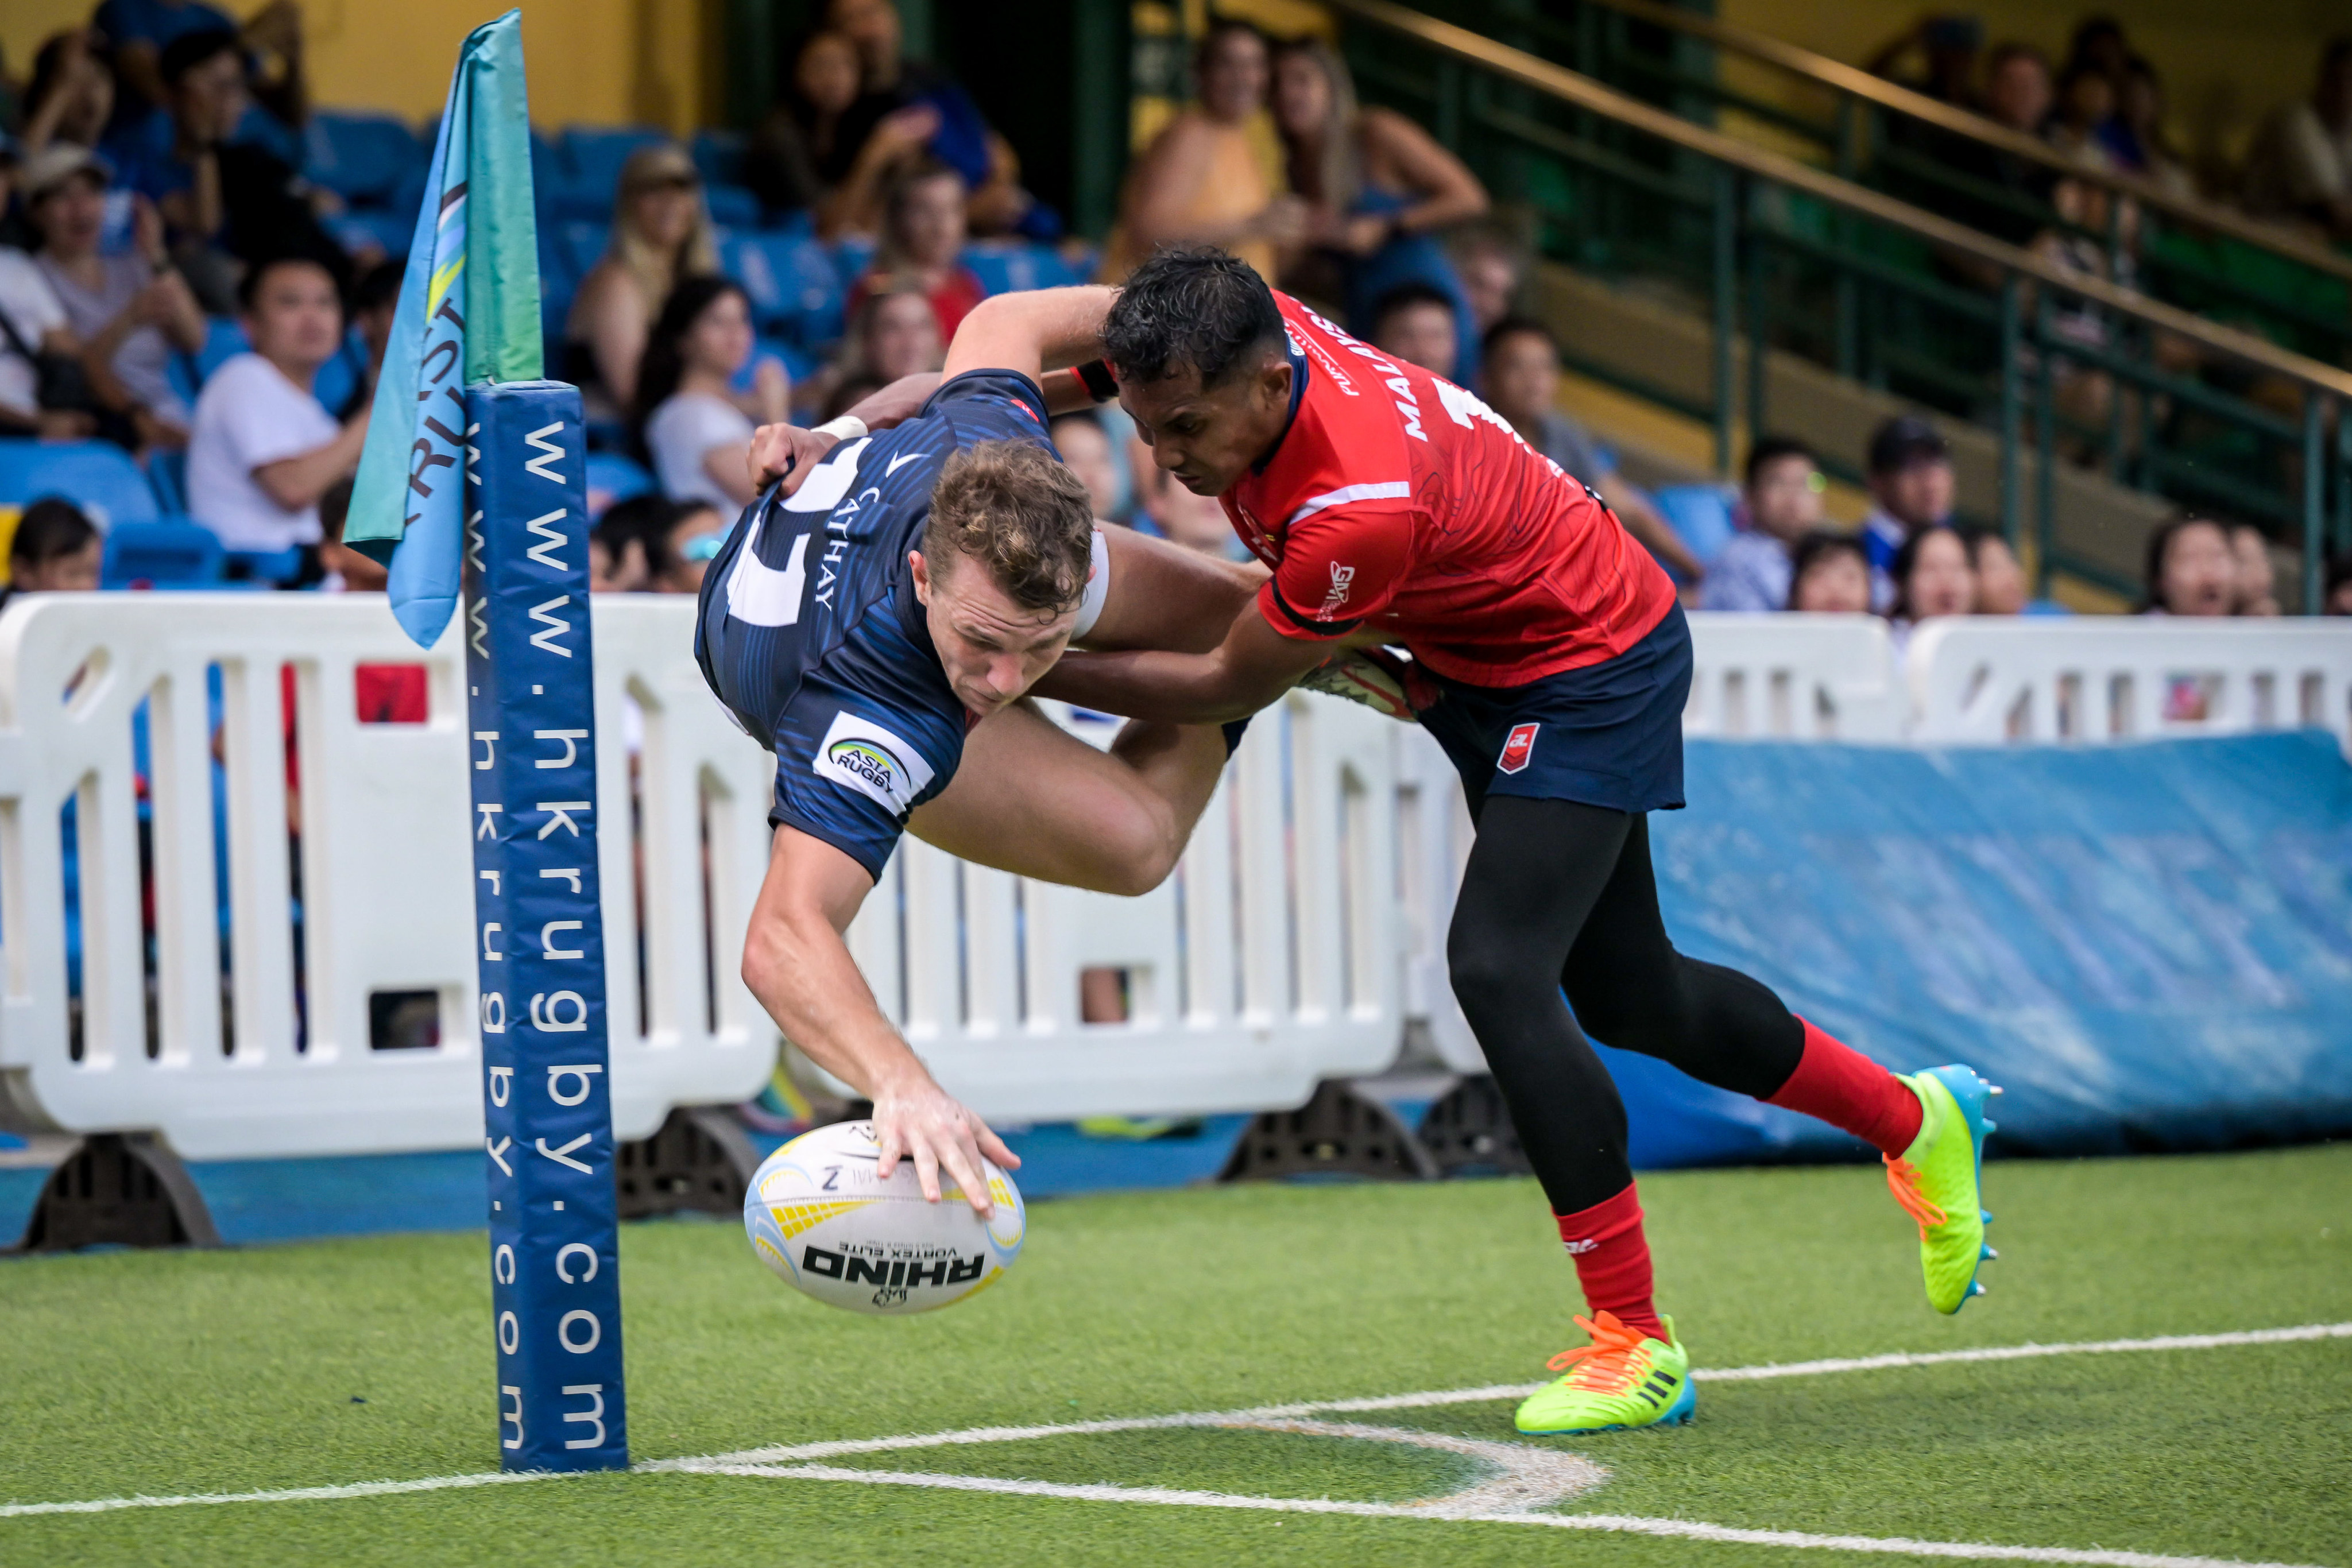 Hong Kong’s Seb Brien scores in the corner during his side’s 88-9 victory over Malaysia in their Asia Rugby Championship clash at Hong Kong Football Club. Photo: HKRU